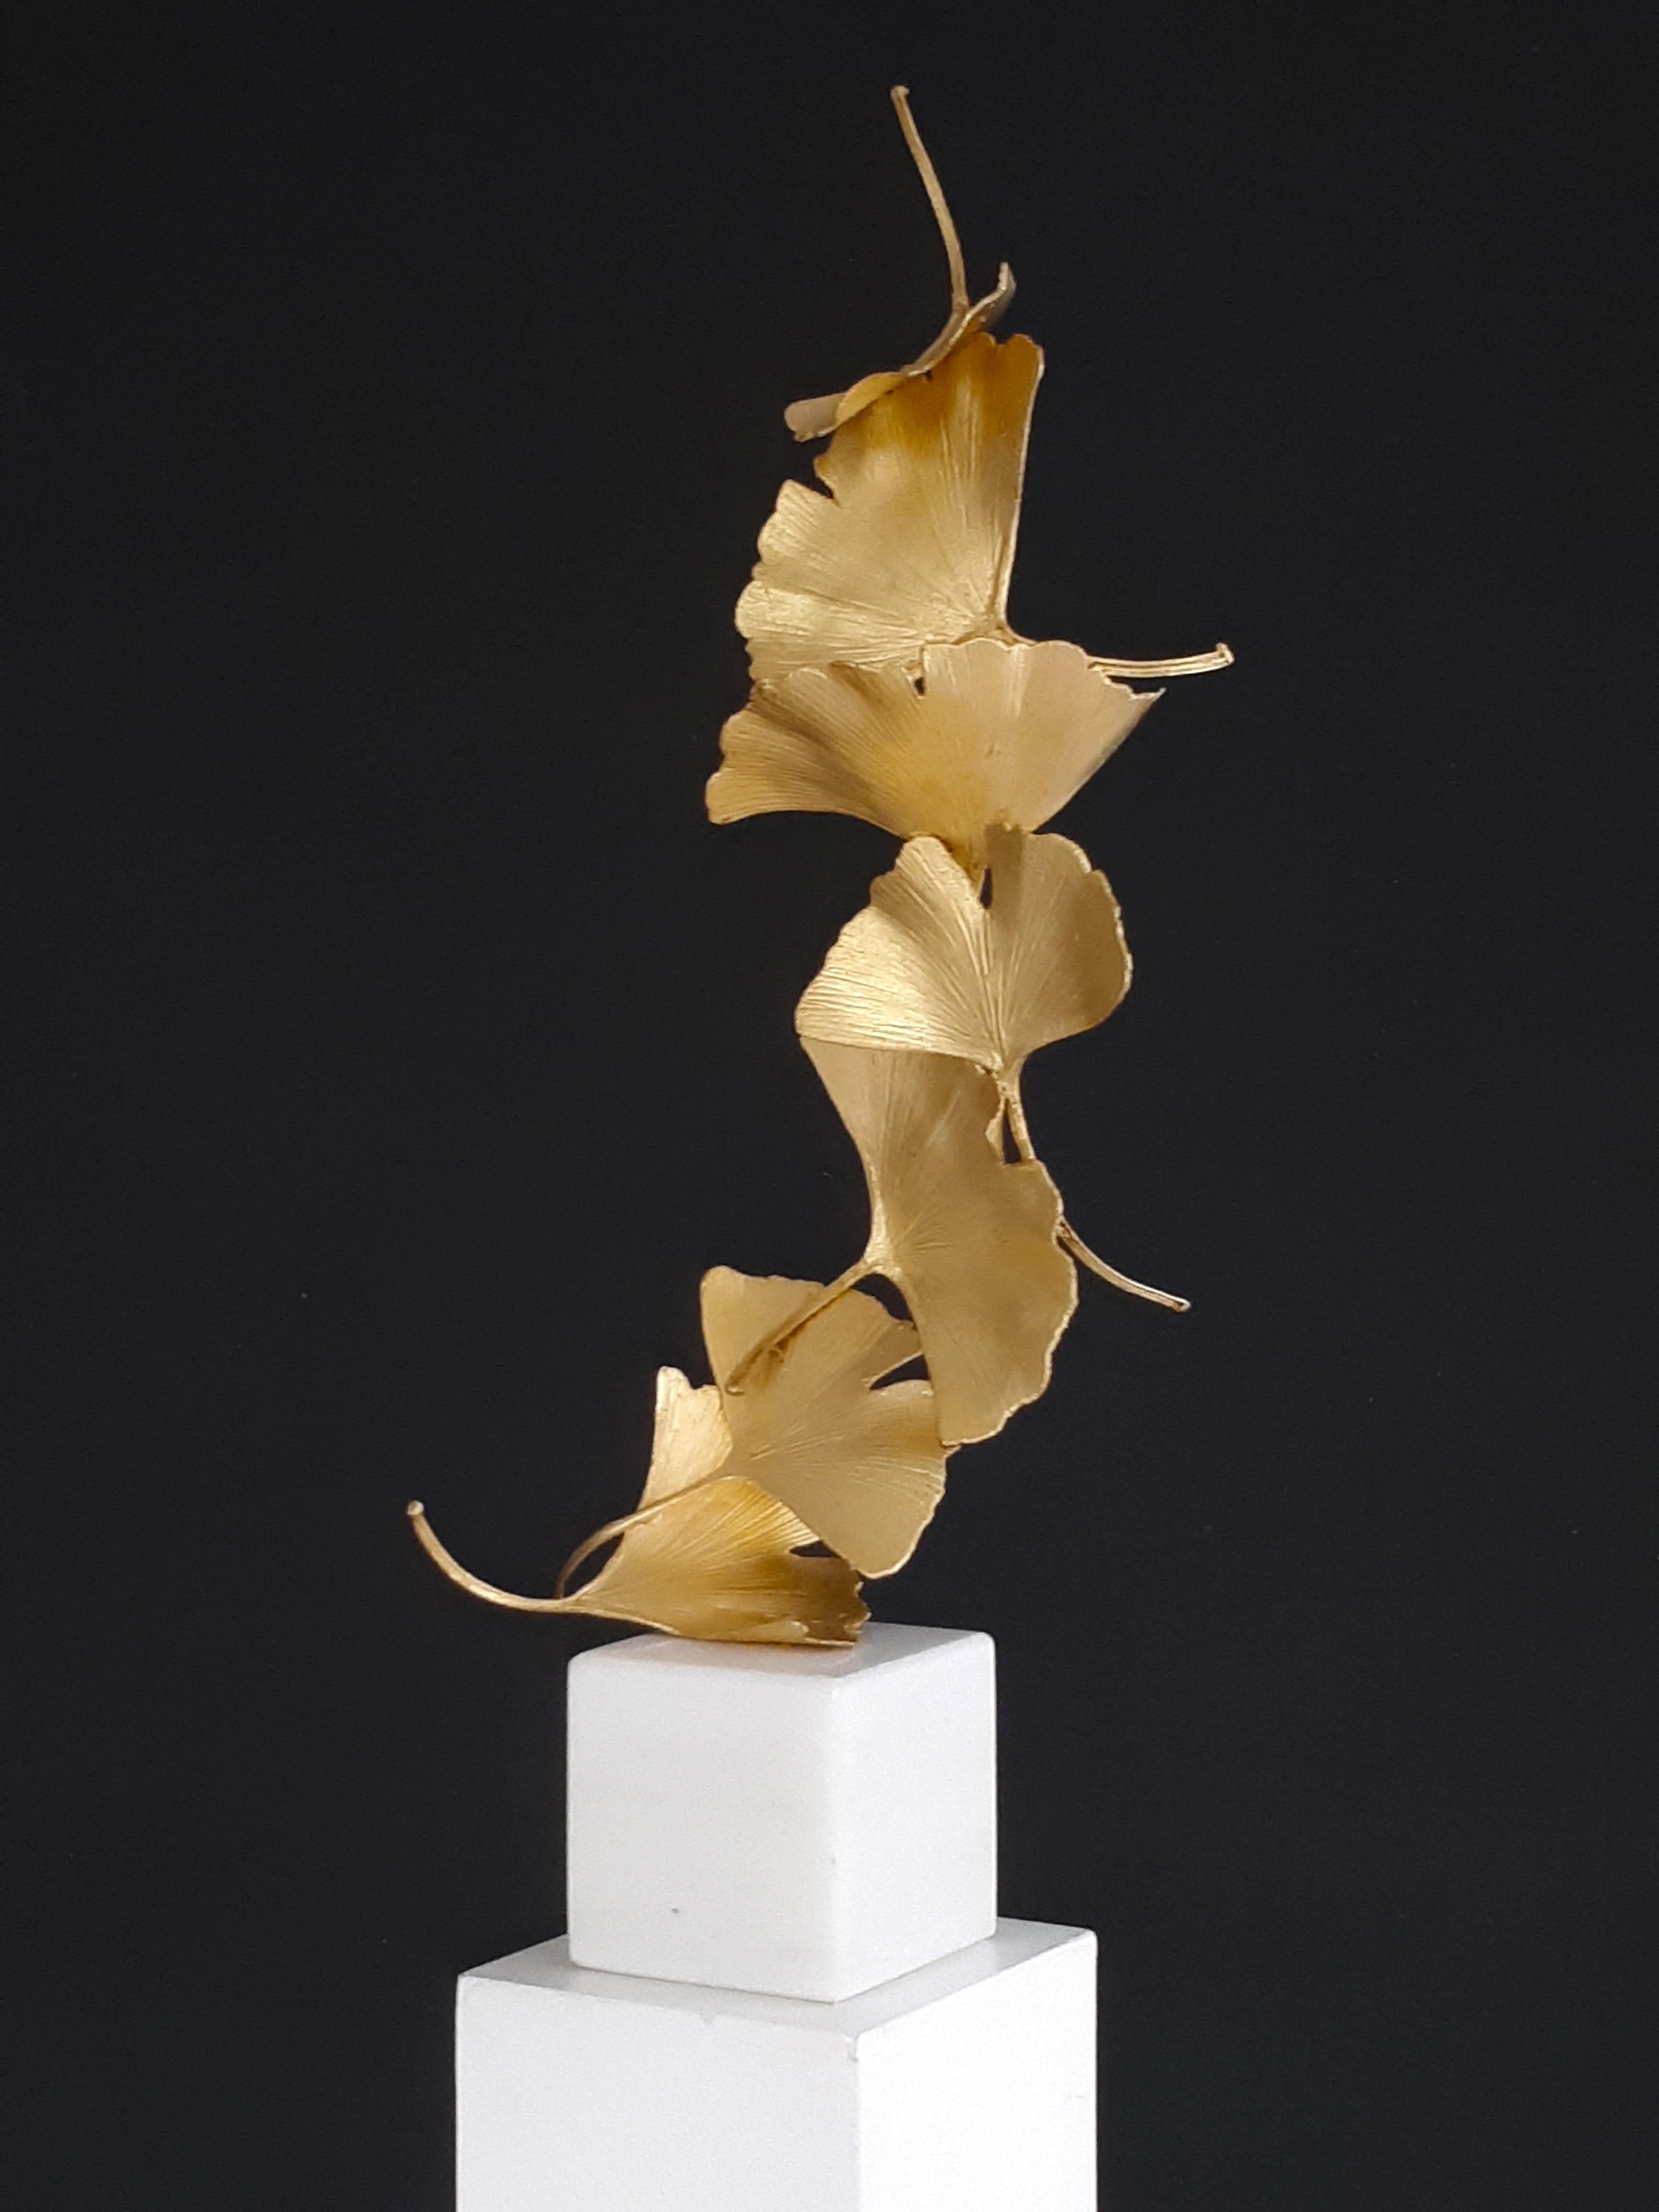 7 Golden Gingko Leaves by Kuno Vollet Gold leaf, brass on white marble base For Sale 1